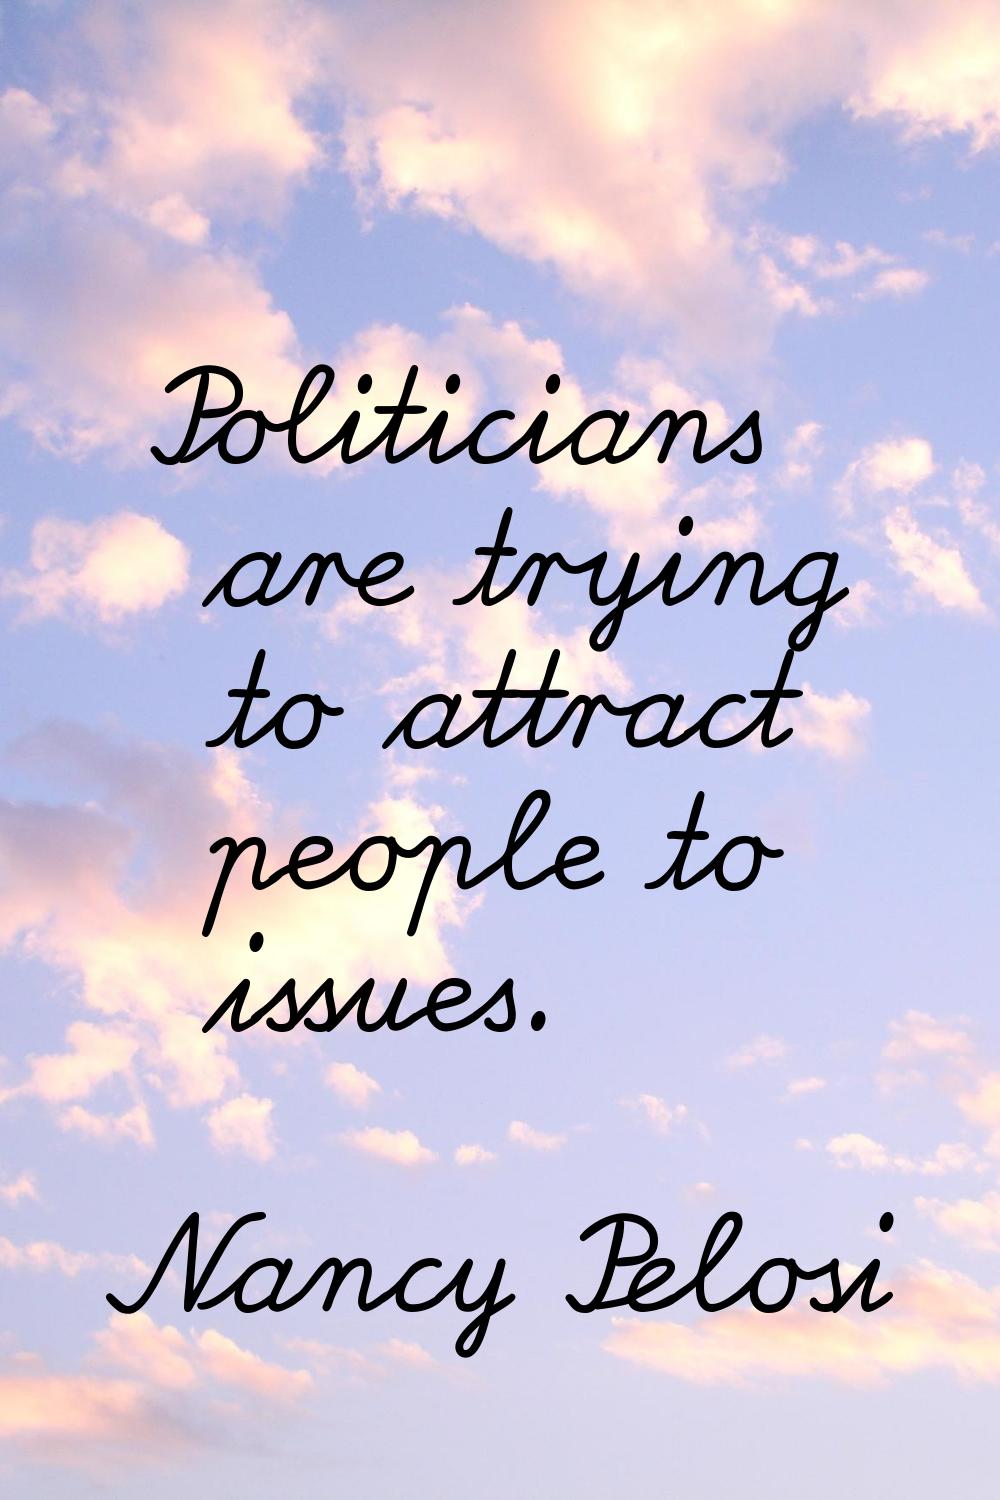 Politicians are trying to attract people to issues.